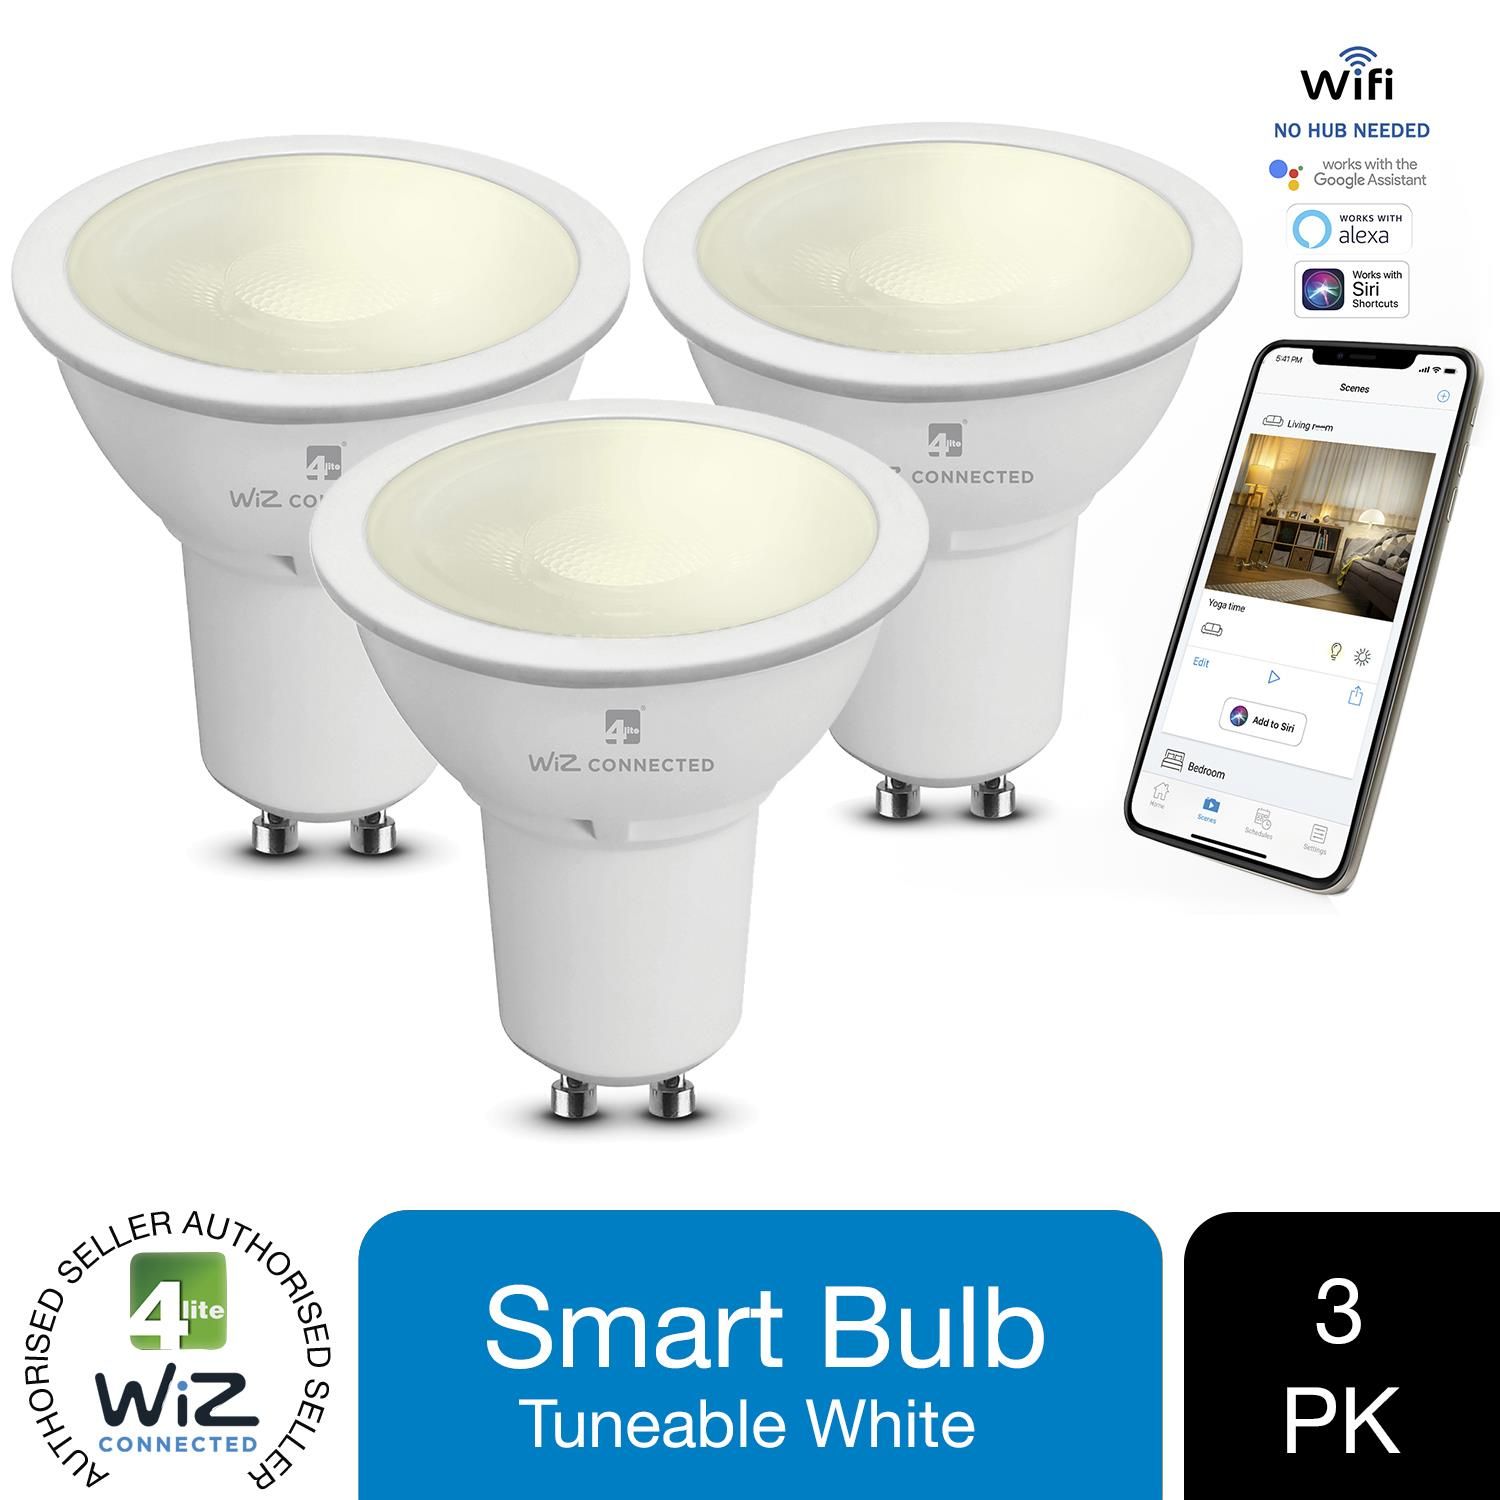 4lite WiZ Connected GU10 White & Dimmable Smart Bulb WiFi. Create a relaxing atmosphere with a warm, cosy white colour. Dimmable via the WiZ app, added functionality includes setting schedules, providing added home security, night lights, save energy and much more!

Features : 

LED 5.5W - equivalent to 50W
Can Be Controlled via the WiZ App and Voice Controlled Smart Devices - Google, Alexa, Siri, Samsung Smart Things
Warm White 2700K - 350 lumens
LED lifetime 25,000 hours
50,000 switching cycles
Dimmable via the Wiz app
Warm White 2700K

Power and Connectivity : 

220-240V 50Hz
5.5W 45mA
Encrypted cloud connection with TLS 1.2 security protocol
Amazon Web Services, pre-subscribed for product’s lifetime
Anonymous sign-in
OAuth 2.0 secured framework
Connection to WiFi on 2.4 GHz frequency mode for wider coverage
32-bit CPU
2 slots for maximum reliability during auto-updates
Physical : 

White
GU10 base type
Heatsink: aluminium and electrophoresis white
Bulb: frosted
Package Includes : 3 Pack of 4lite WiZ Connected GU10 White & Dimmable Smart Bulb WiFi